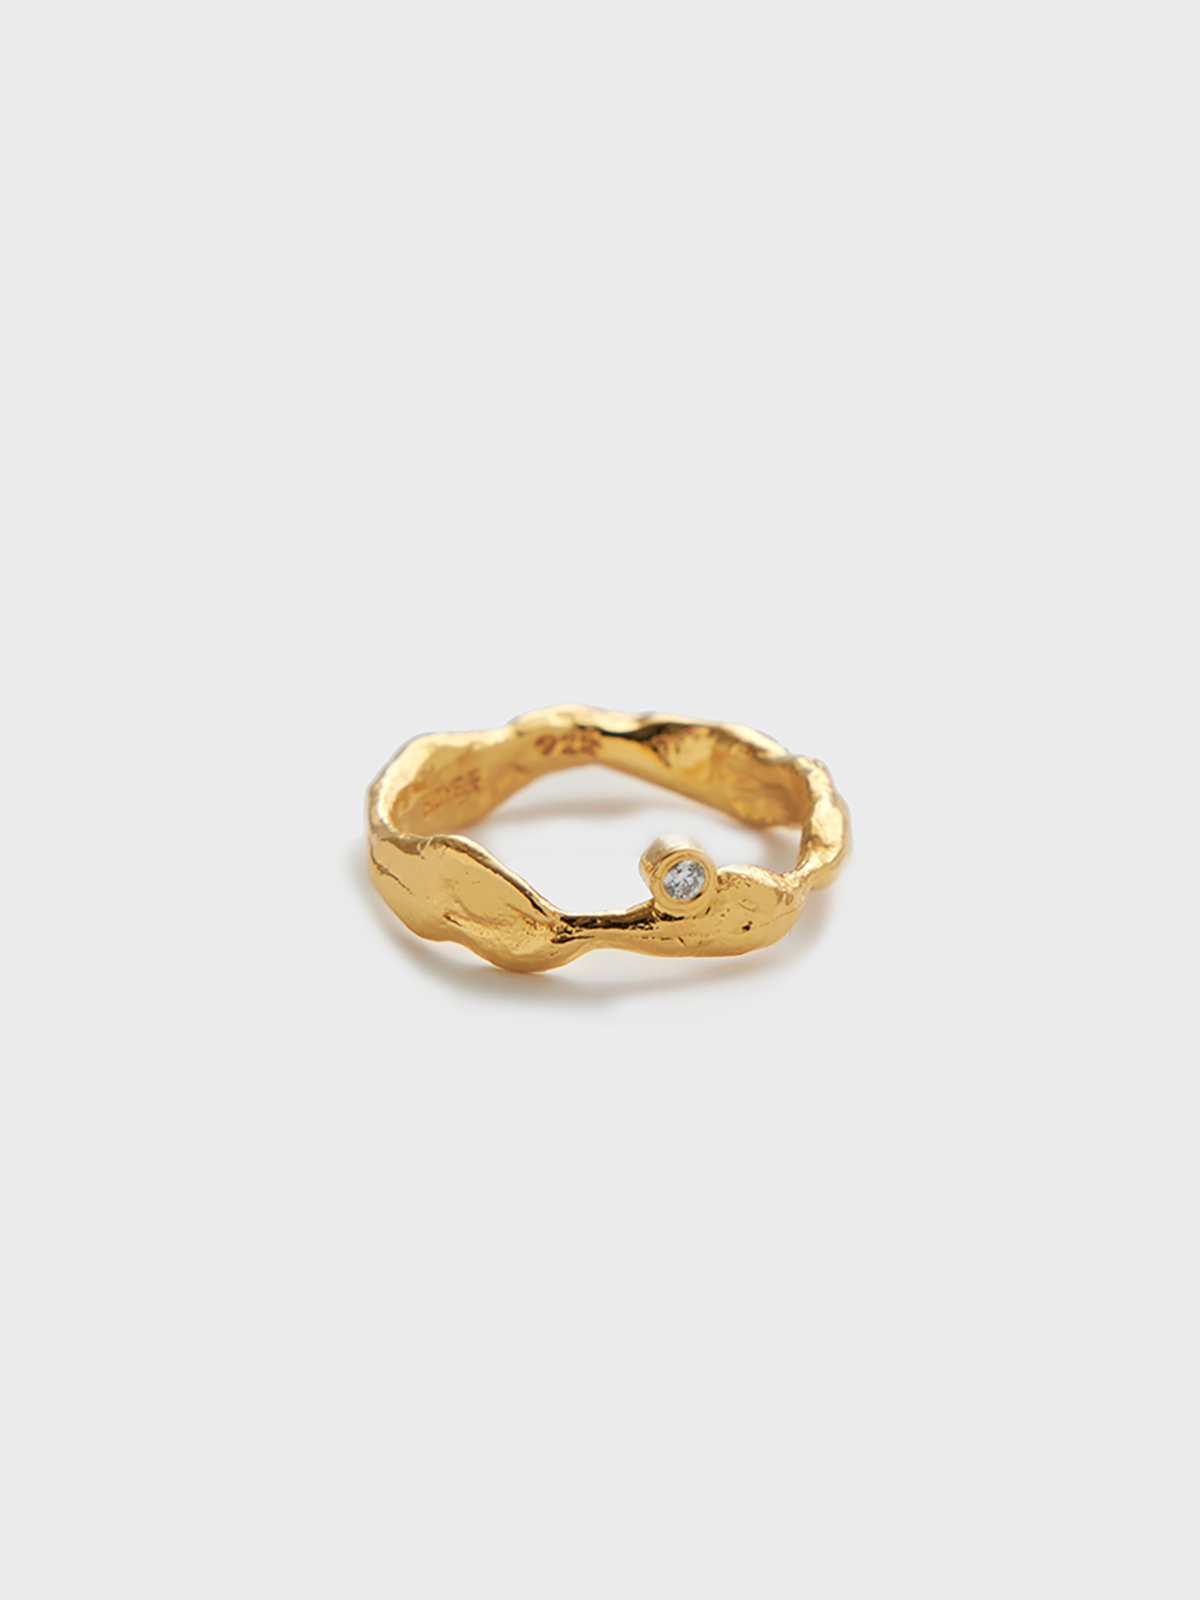 Lea Hoyer - Elin Ring in Gold Plating